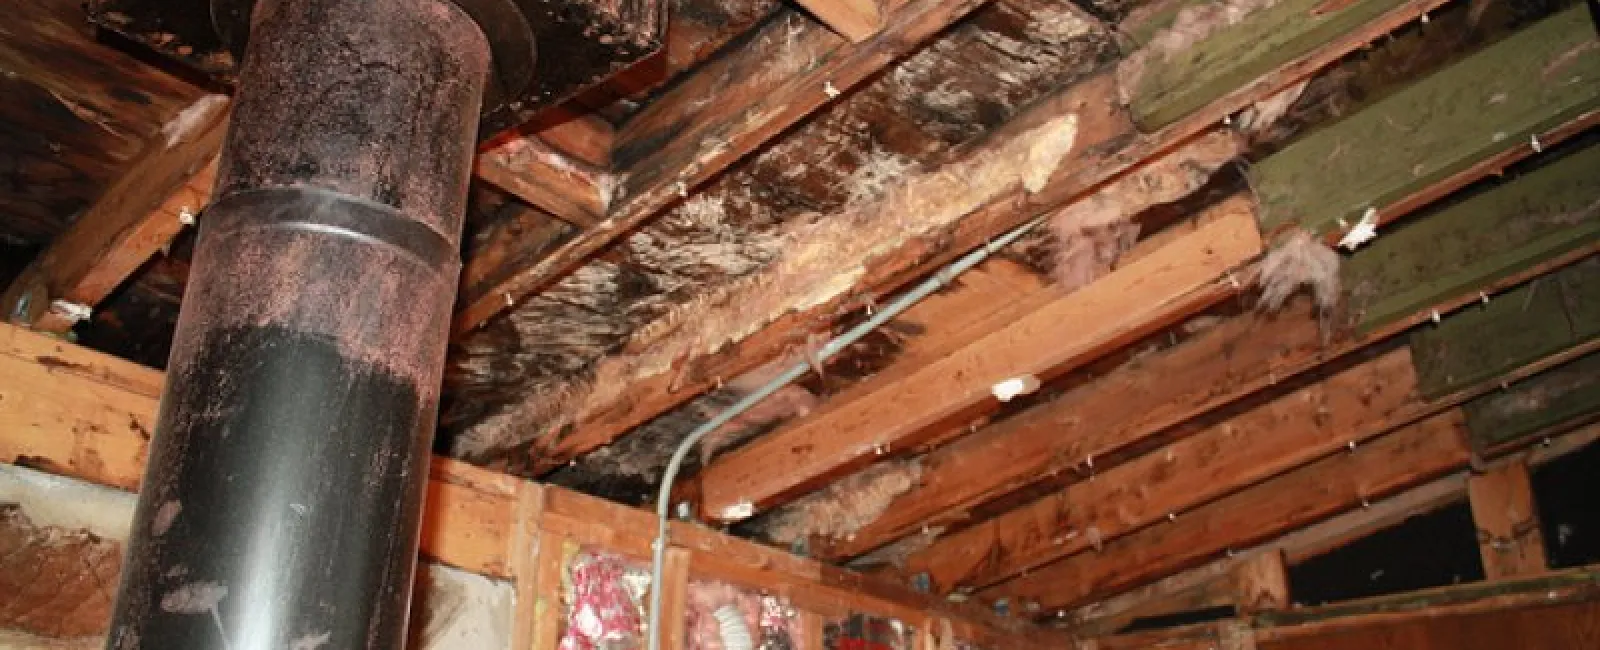 A leaking roof is a serious matter